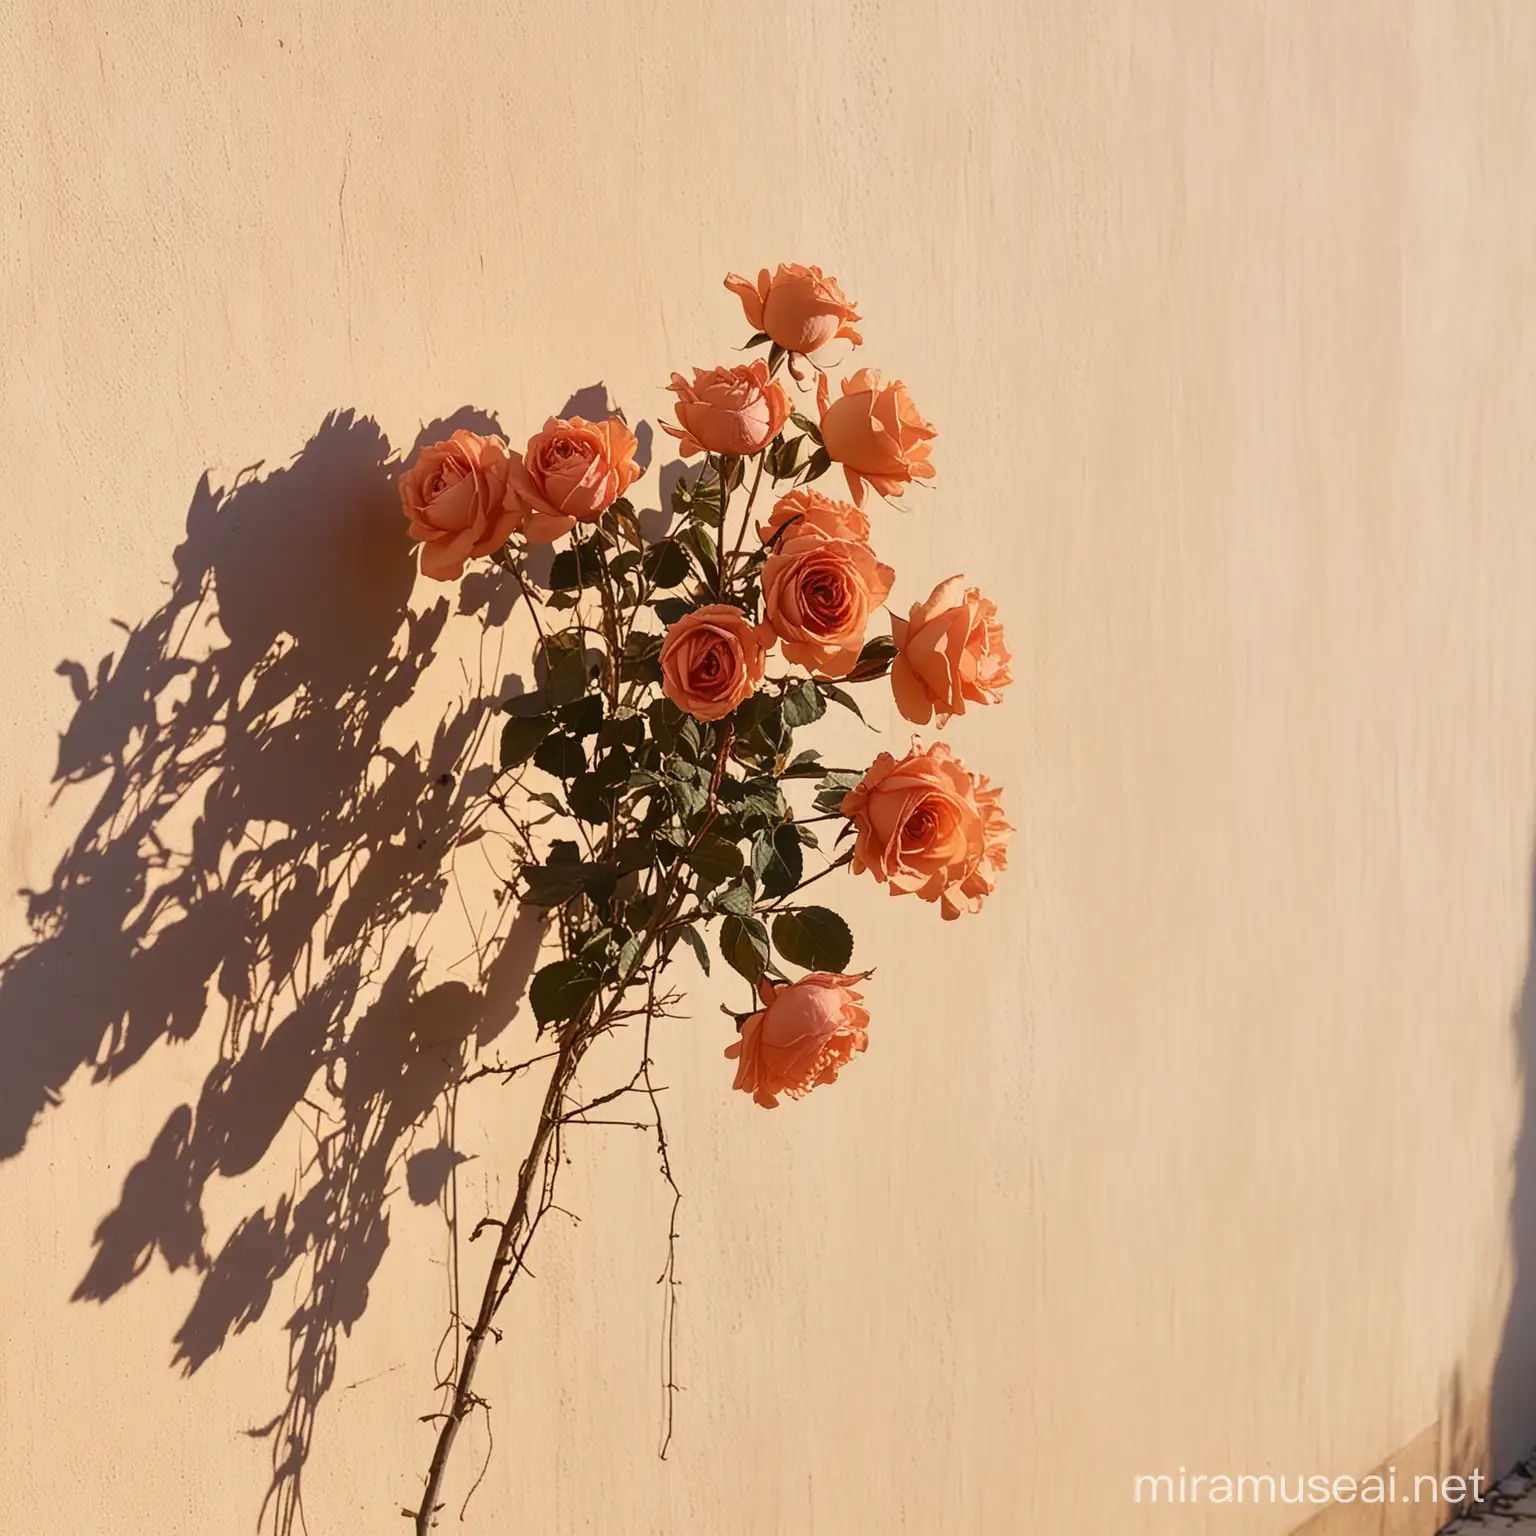 A picture of a Bunch of Dry rose and Its shadow falling on a wall , colour tone is of Sunset.